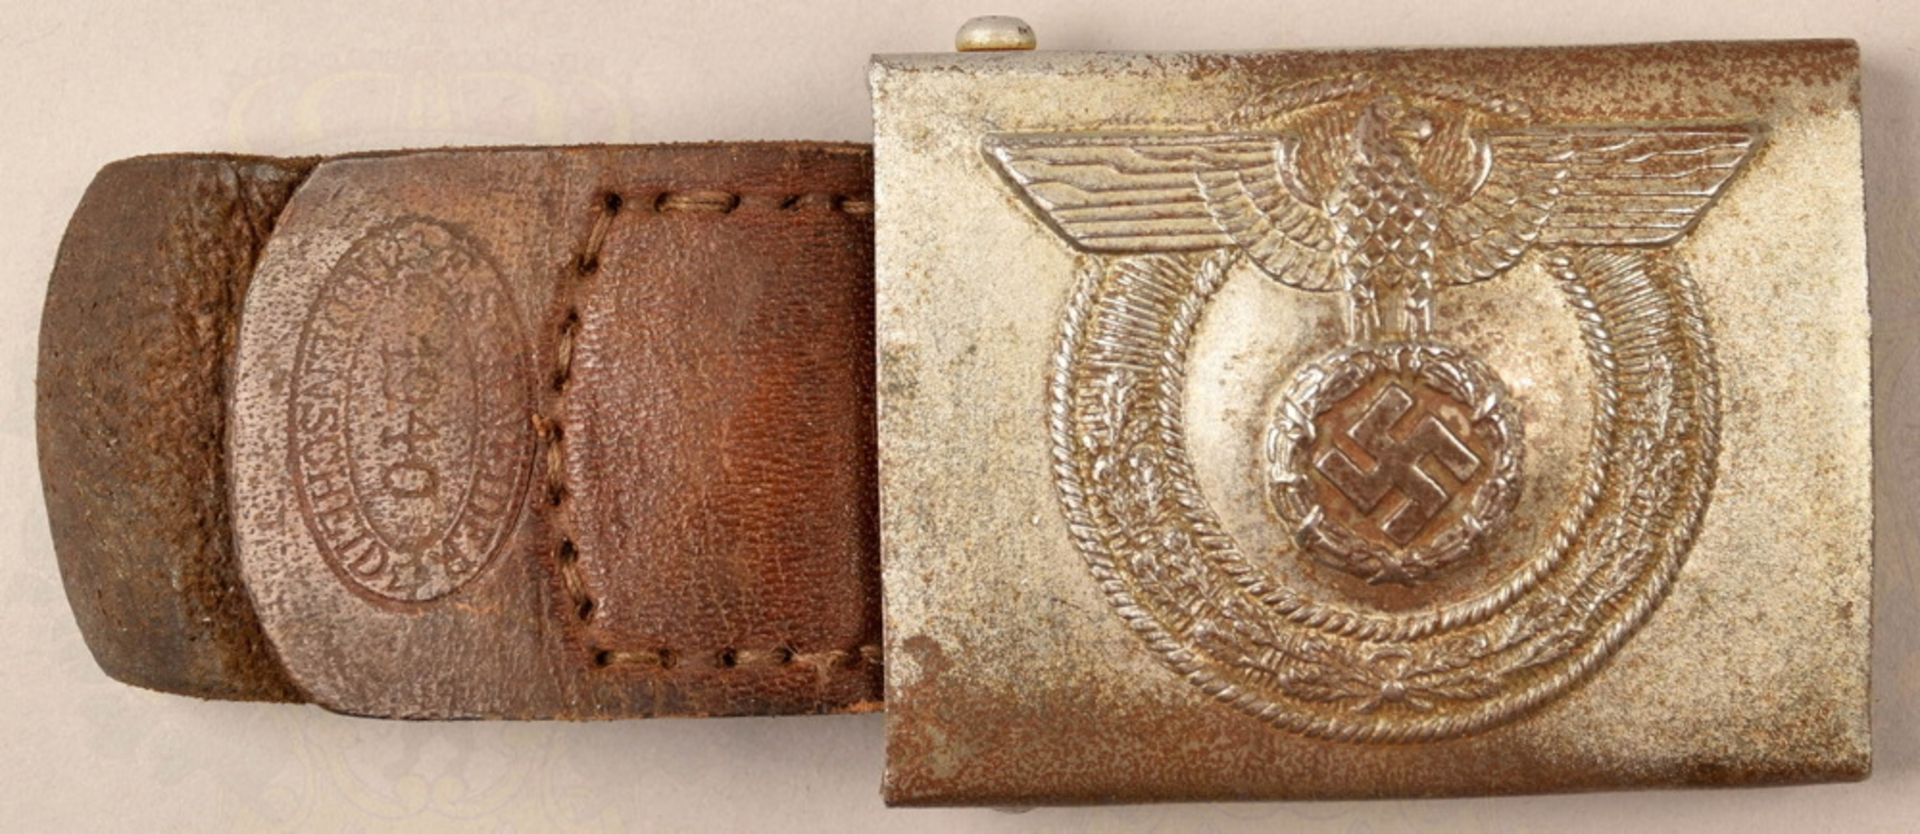 Belt buckle for enlisted men of the SA military units - Image 2 of 3